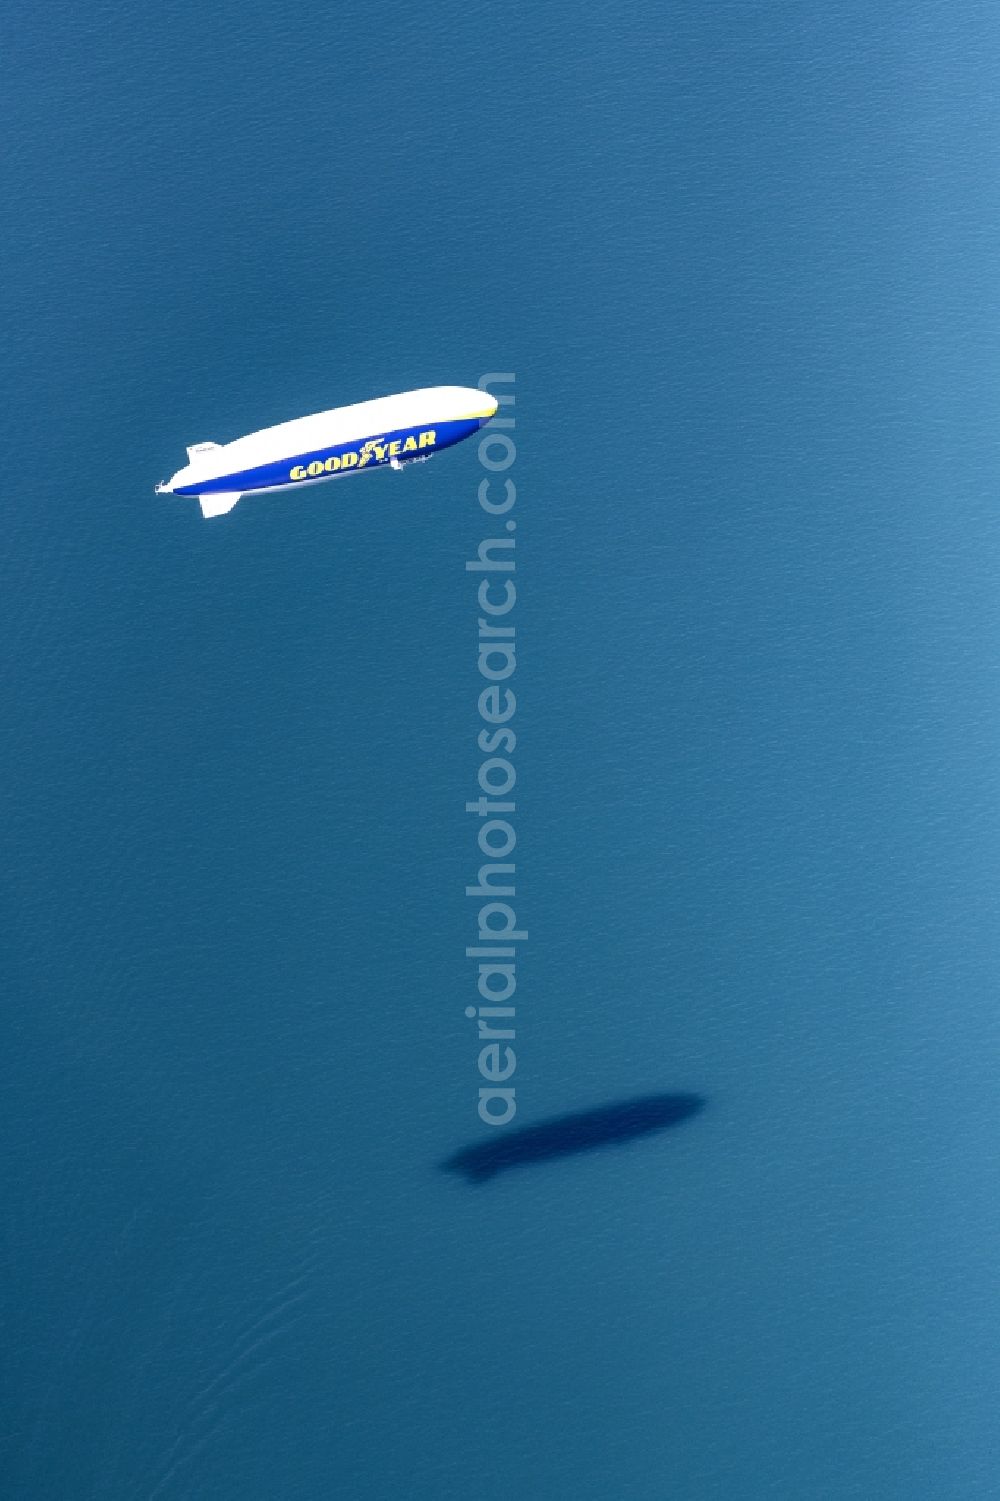 Aerial image Konstanz - Airship ueber dem Bodensee in flight over the airspace in Konstanz in the state Baden-Wuerttemberg, Germany